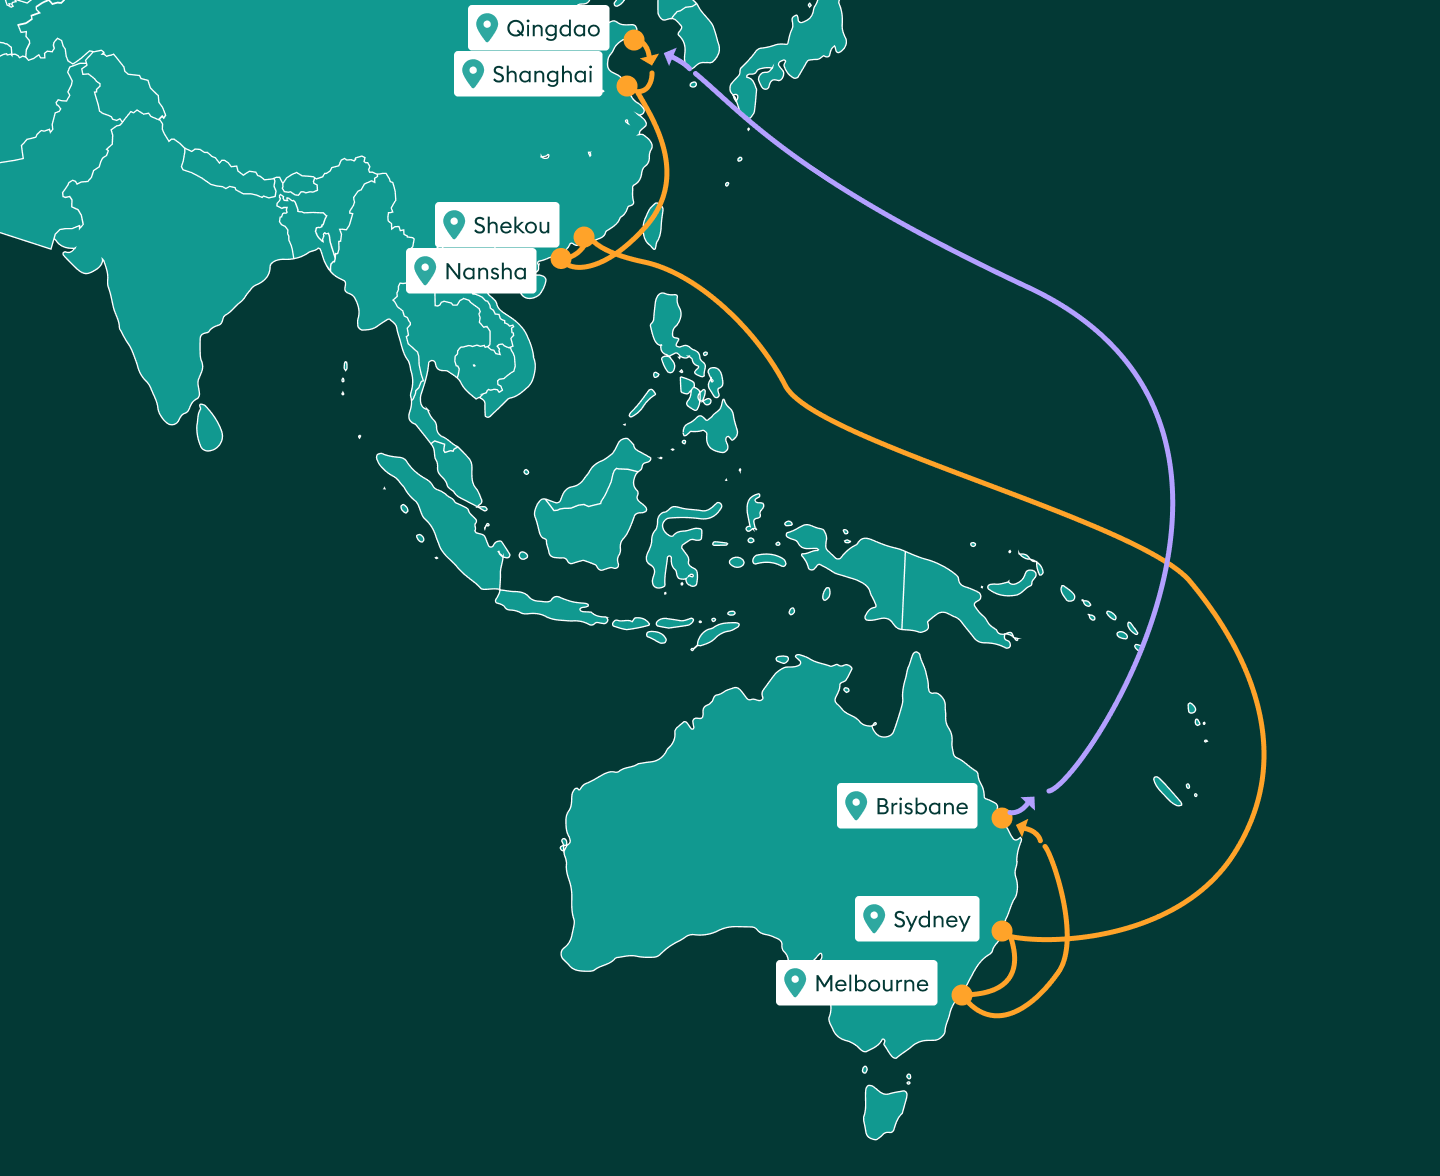 Shipping routes between China and Australia